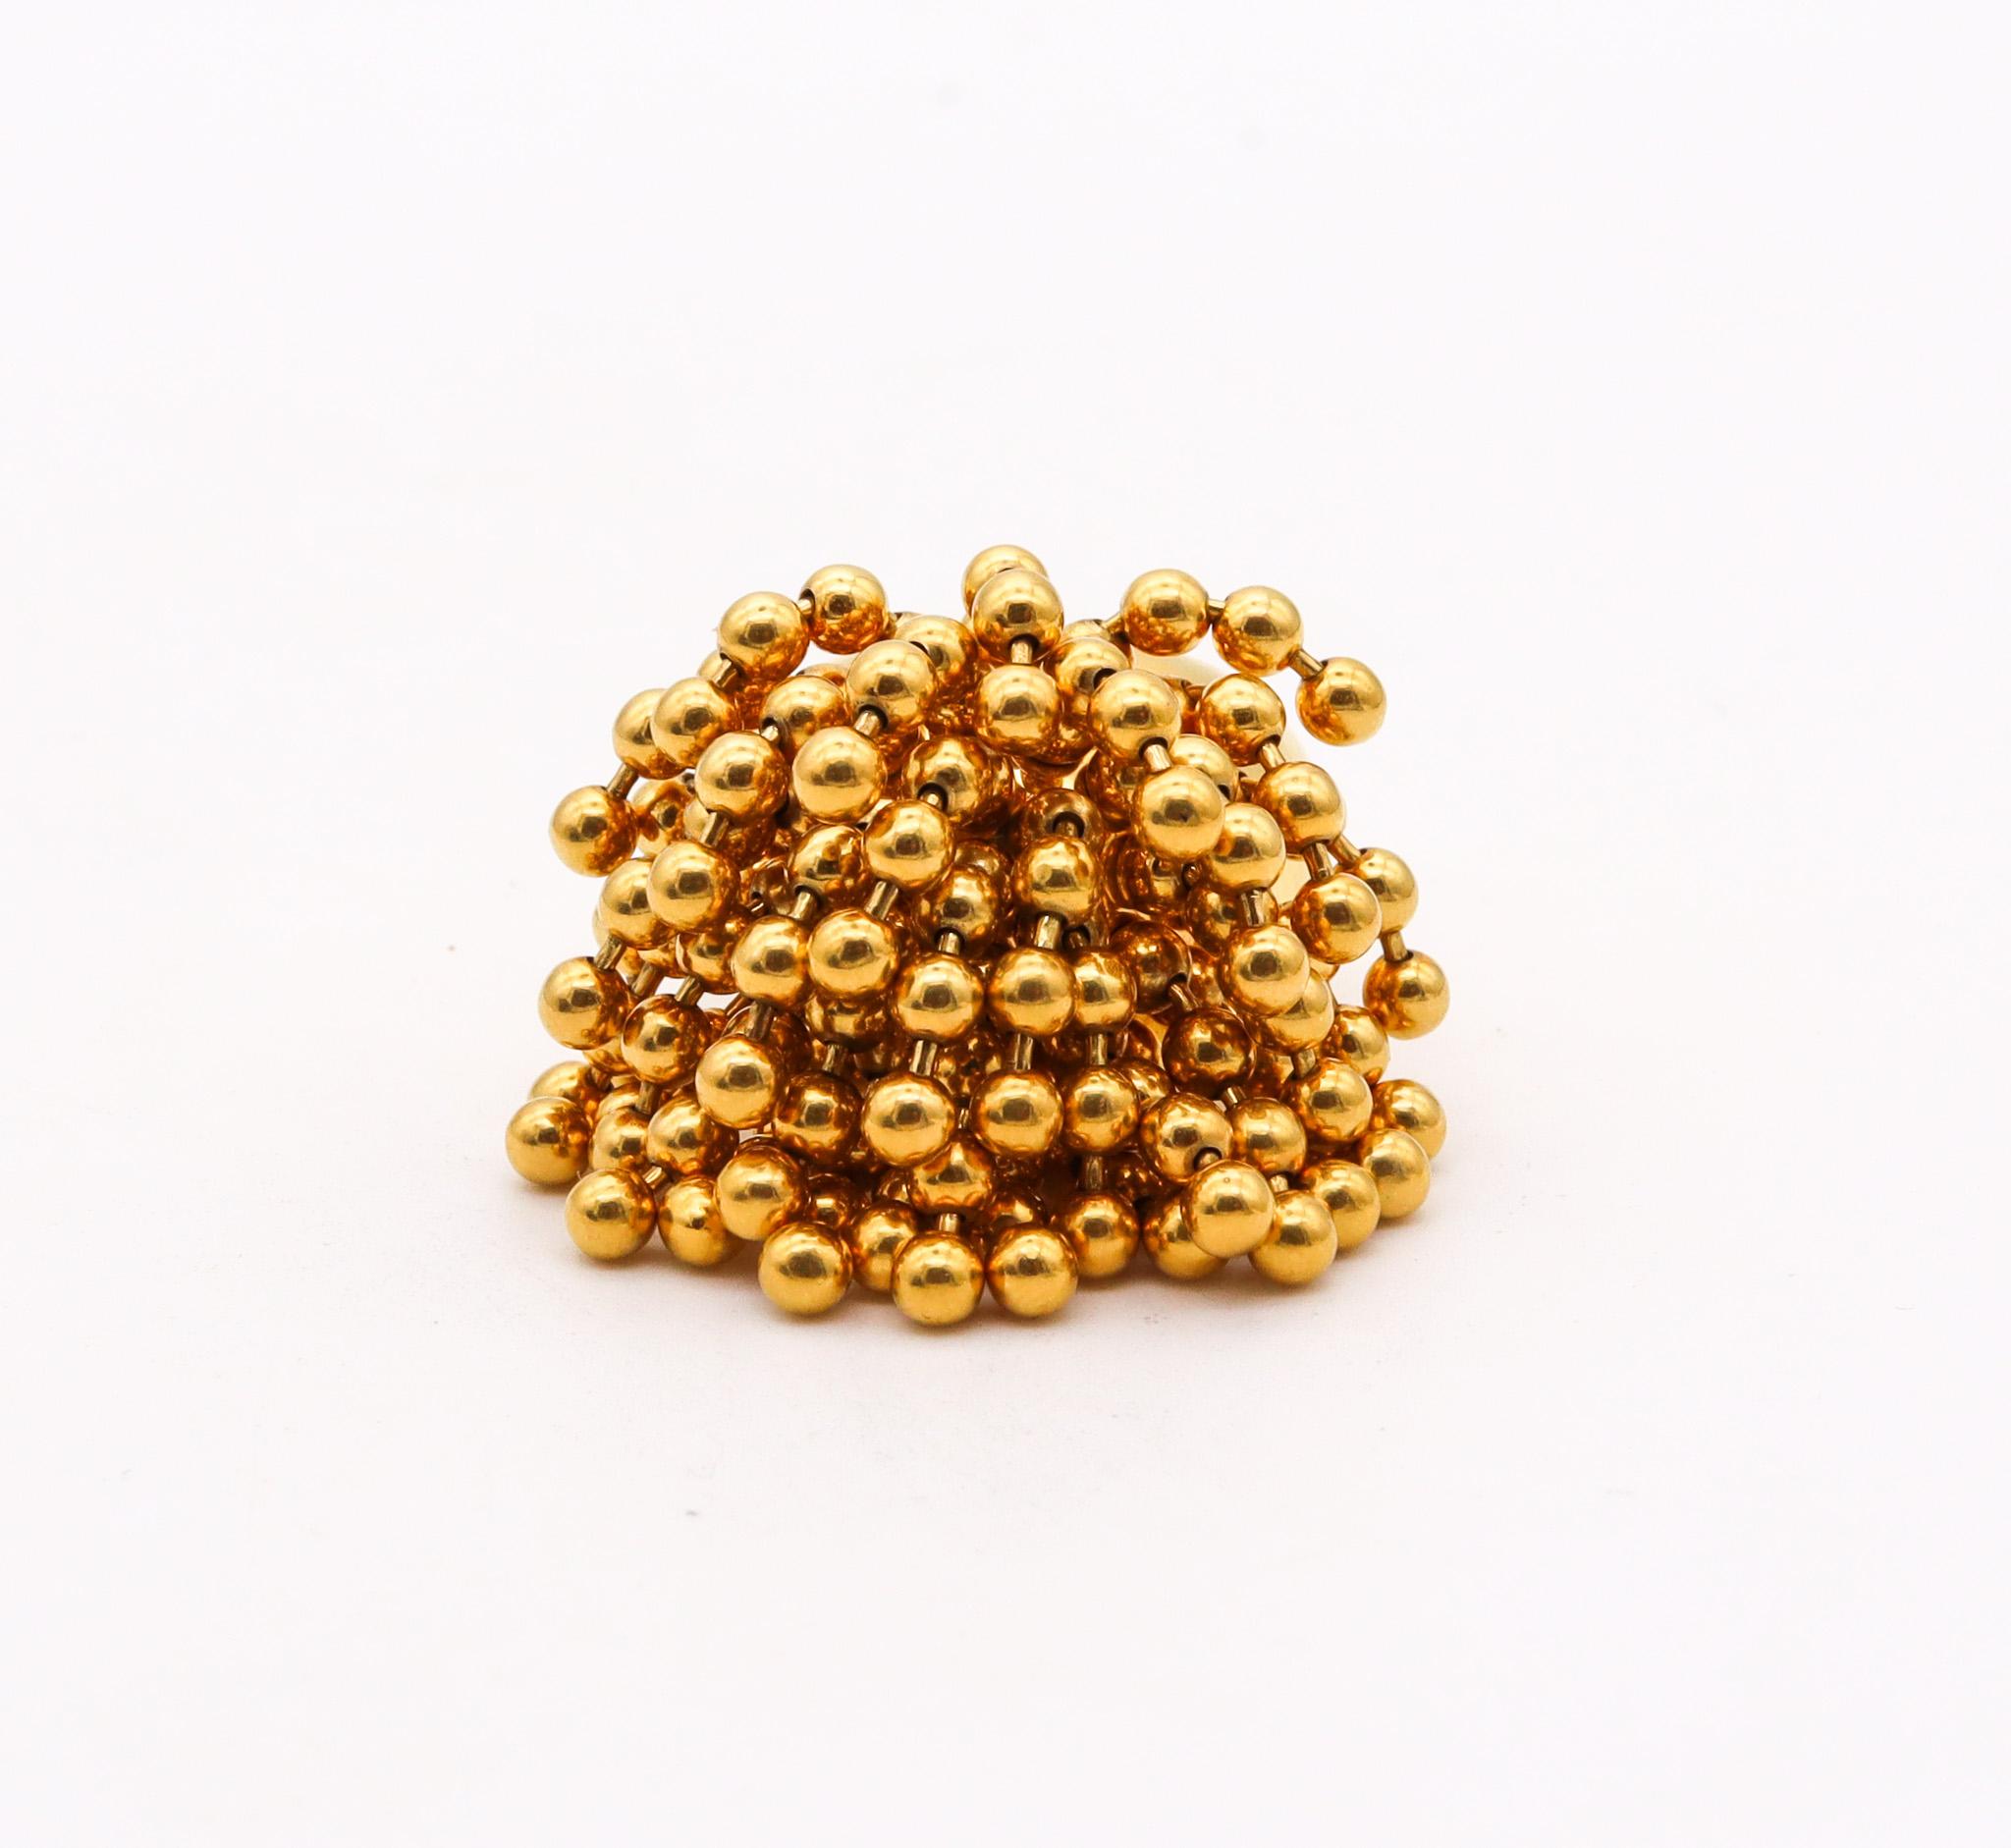 Cartier Nouvelle Bague Pom Pom Kinetic Cocktail Ring in 18 Karat Yellow Gold In Excellent Condition For Sale In Miami, FL